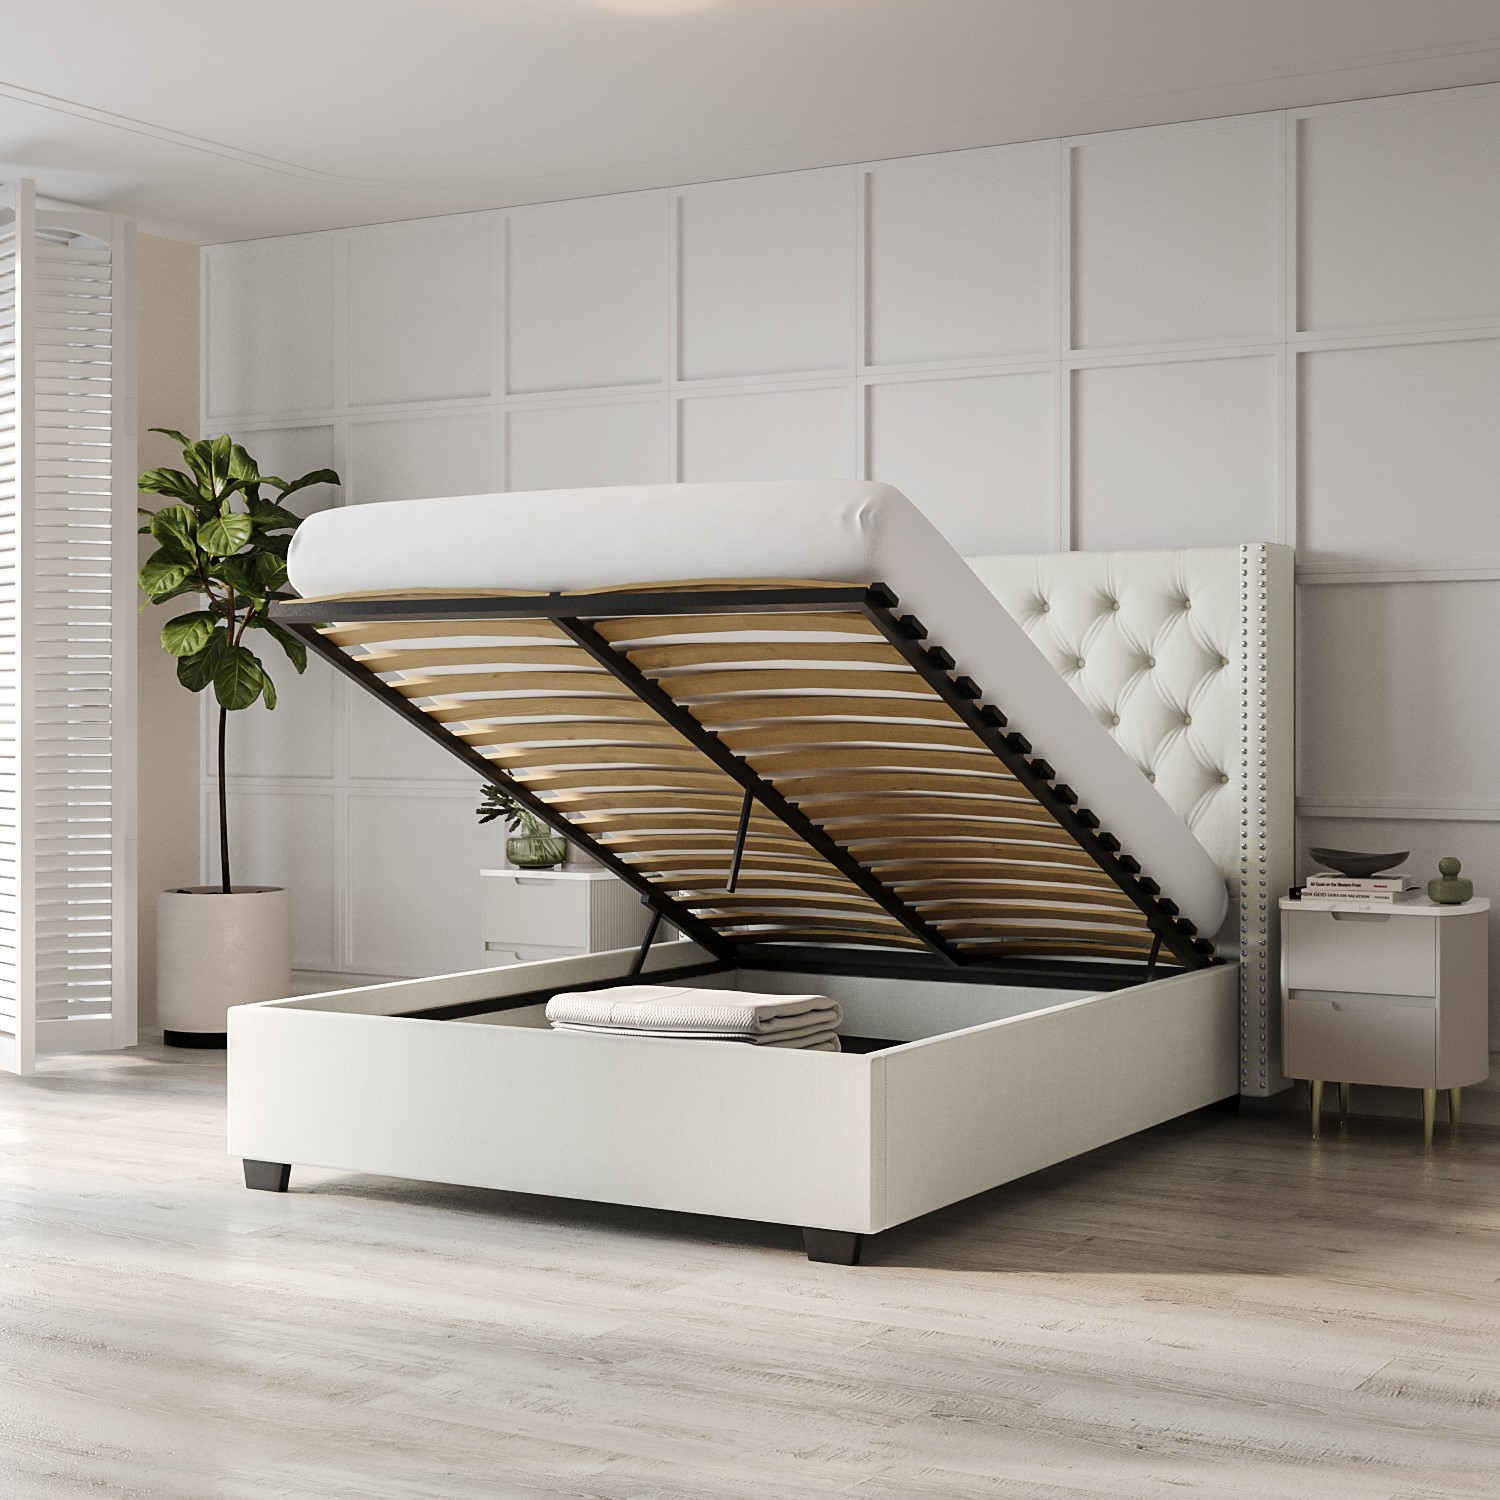 Read more about Off-white fabric double ottoman bed with winged headboard maeva